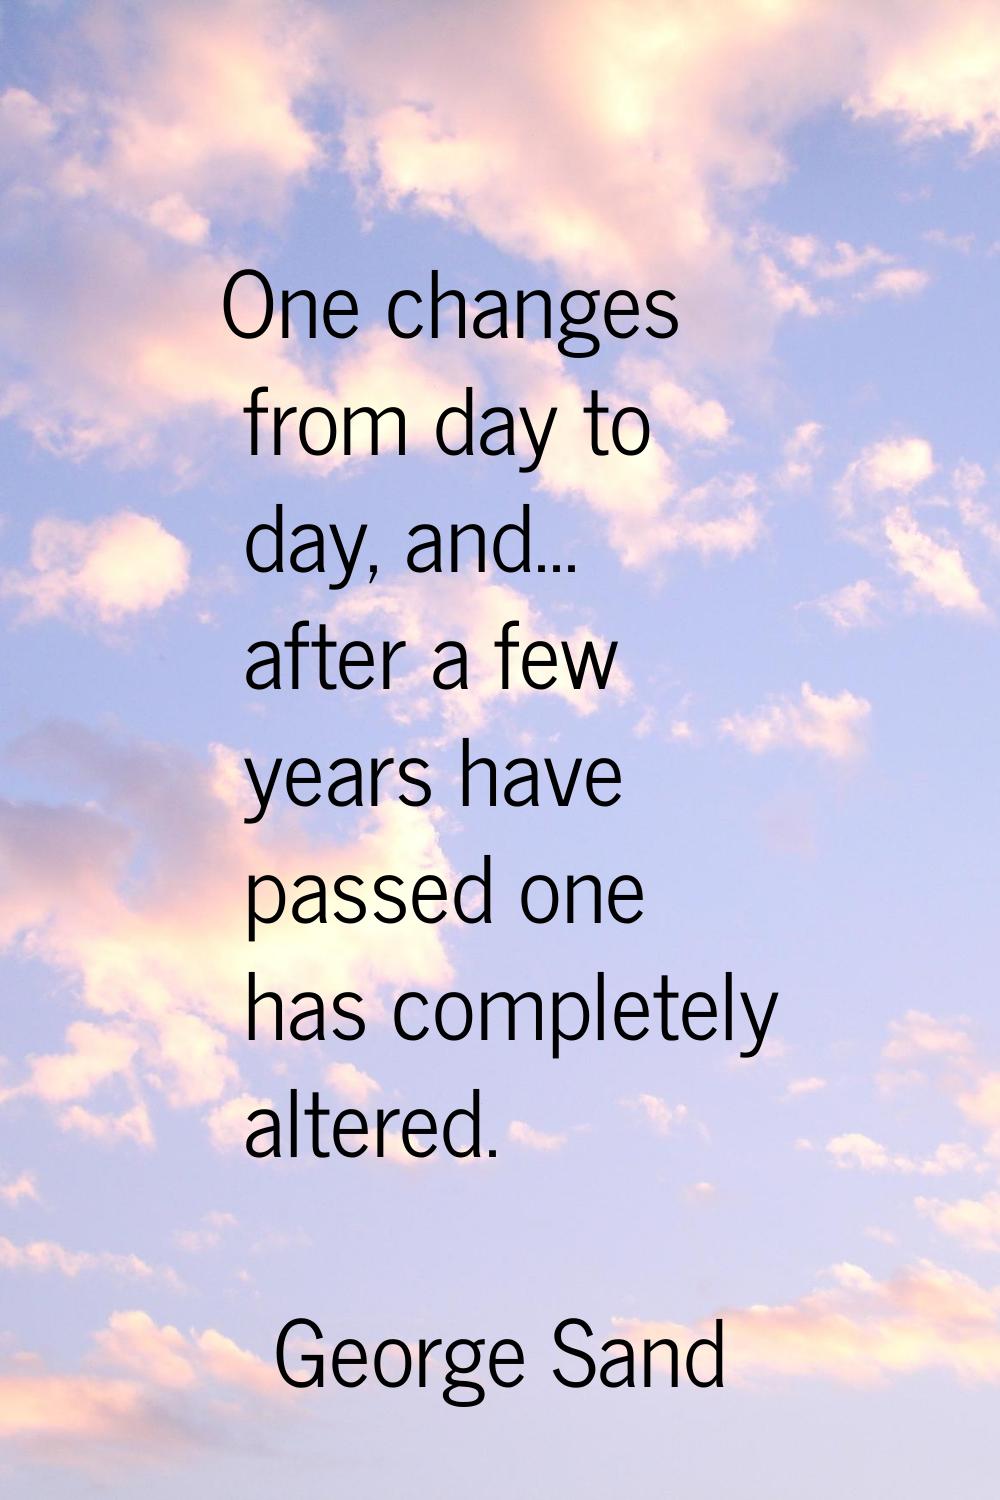 One changes from day to day, and... after a few years have passed one has completely altered.